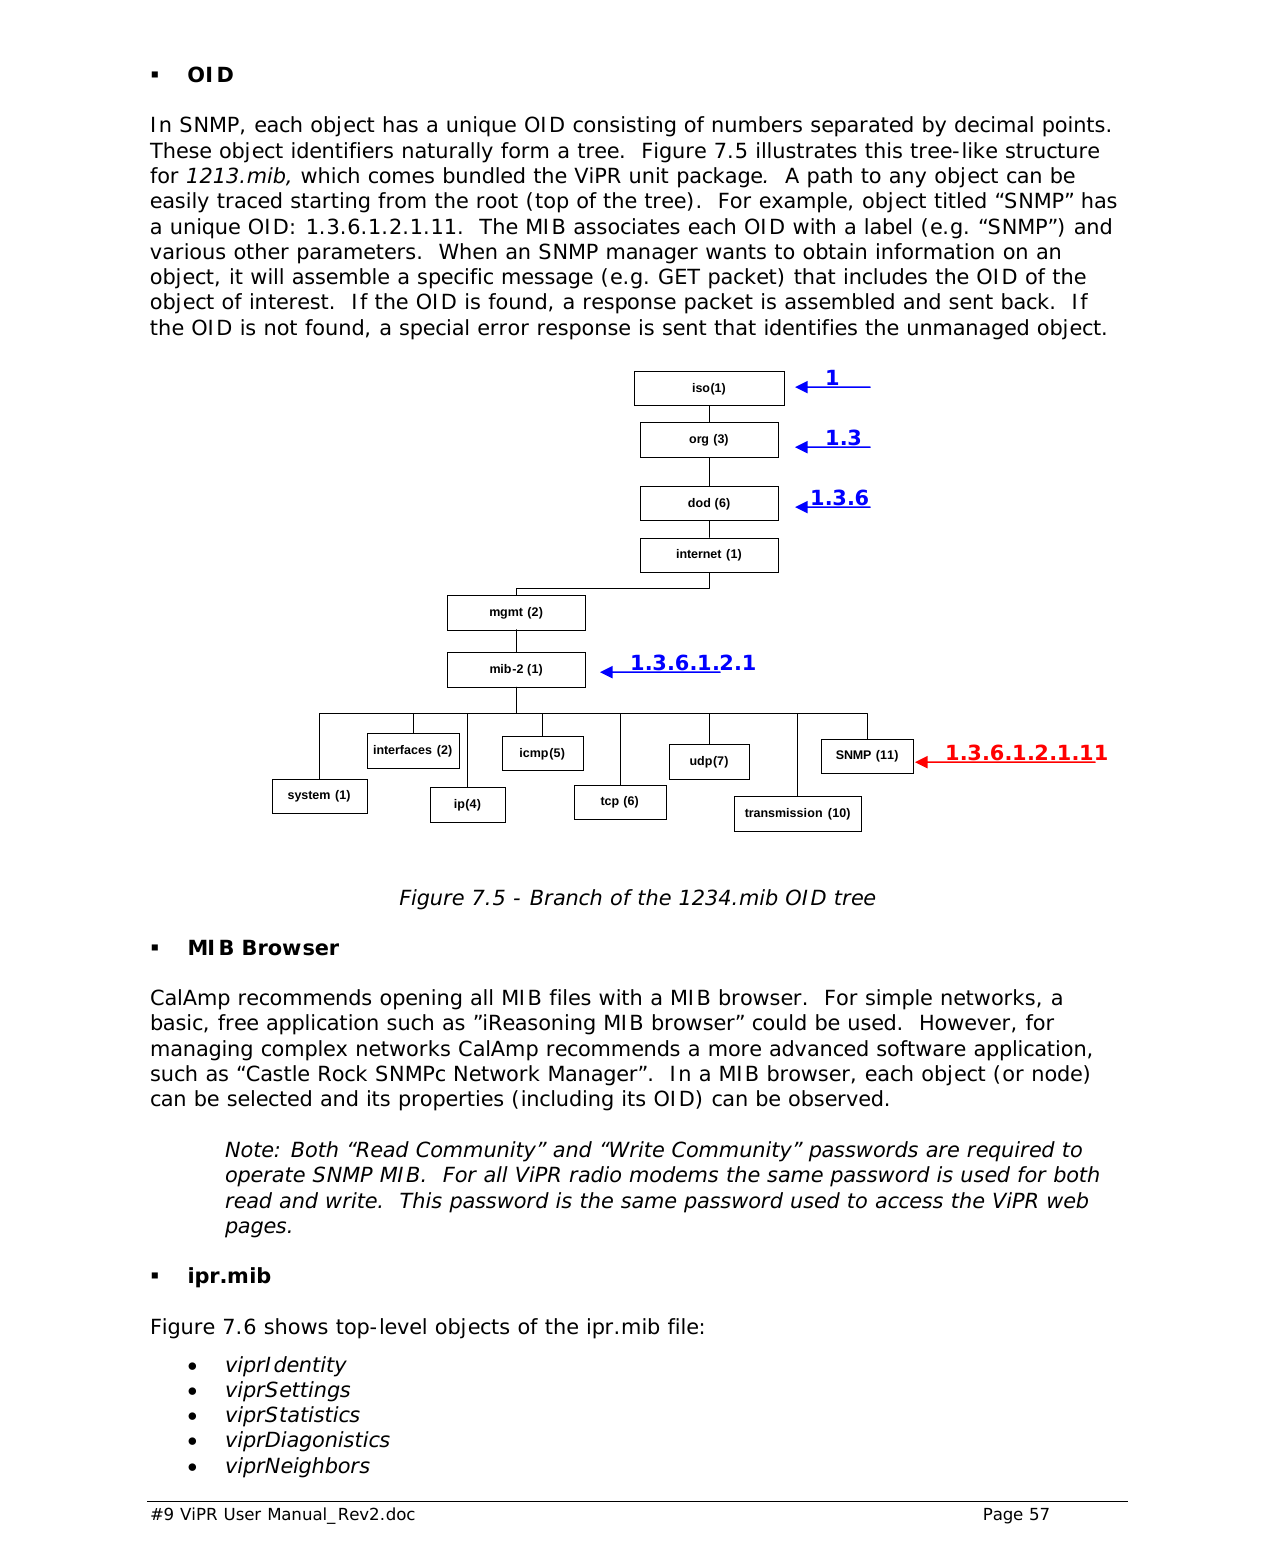  #9 ViPR User Manual_Rev2.doc    Page 57   OID In SNMP, each object has a unique OID consisting of numbers separated by decimal points.  These object identifiers naturally form a tree.  Figure 7.5 illustrates this tree-like structure for 1213.mib, which comes bundled the ViPR unit package.  A path to any object can be easily traced starting from the root (top of the tree).  For example, object titled “SNMP” has a unique OID: 1.3.6.1.2.1.11.  The MIB associates each OID with a label (e.g. “SNMP”) and various other parameters.  When an SNMP manager wants to obtain information on an object, it will assemble a specific message (e.g. GET packet) that includes the OID of the object of interest.  If the OID is found, a response packet is assembled and sent back.  If the OID is not found, a special error response is sent that identifies the unmanaged object.   Figure 7.5 - Branch of the 1234.mib OID tree   MIB Browser CalAmp recommends opening all MIB files with a MIB browser.  For simple networks, a basic, free application such as ”iReasoning MIB browser” could be used.  However, for managing complex networks CalAmp recommends a more advanced software application, such as “Castle Rock SNMPc Network Manager”.  In a MIB browser, each object (or node) can be selected and its properties (including its OID) can be observed.  Note: Both “Read Community” and “Write Community” passwords are required to operate SNMP MIB.  For all ViPR radio modems the same password is used for both read and write.  This password is the same password used to access the ViPR web pages.  ipr.mib  Figure 7.6 shows top-level objects of the ipr.mib file: • viprIdentity • viprSettings • viprStatistics • viprDiagonistics • viprNeighbors org (3)iso(1)ip(4)icmp(5) SNMP (11)udp(7)system (1)interfaces (2)dod (6)internet (1)mgmt (2)mib-2 (1)tcp (6) transmission (10)1.3.6.1.2.1 1.3.6.1.2.1.11 1 1.3.6 1.3 